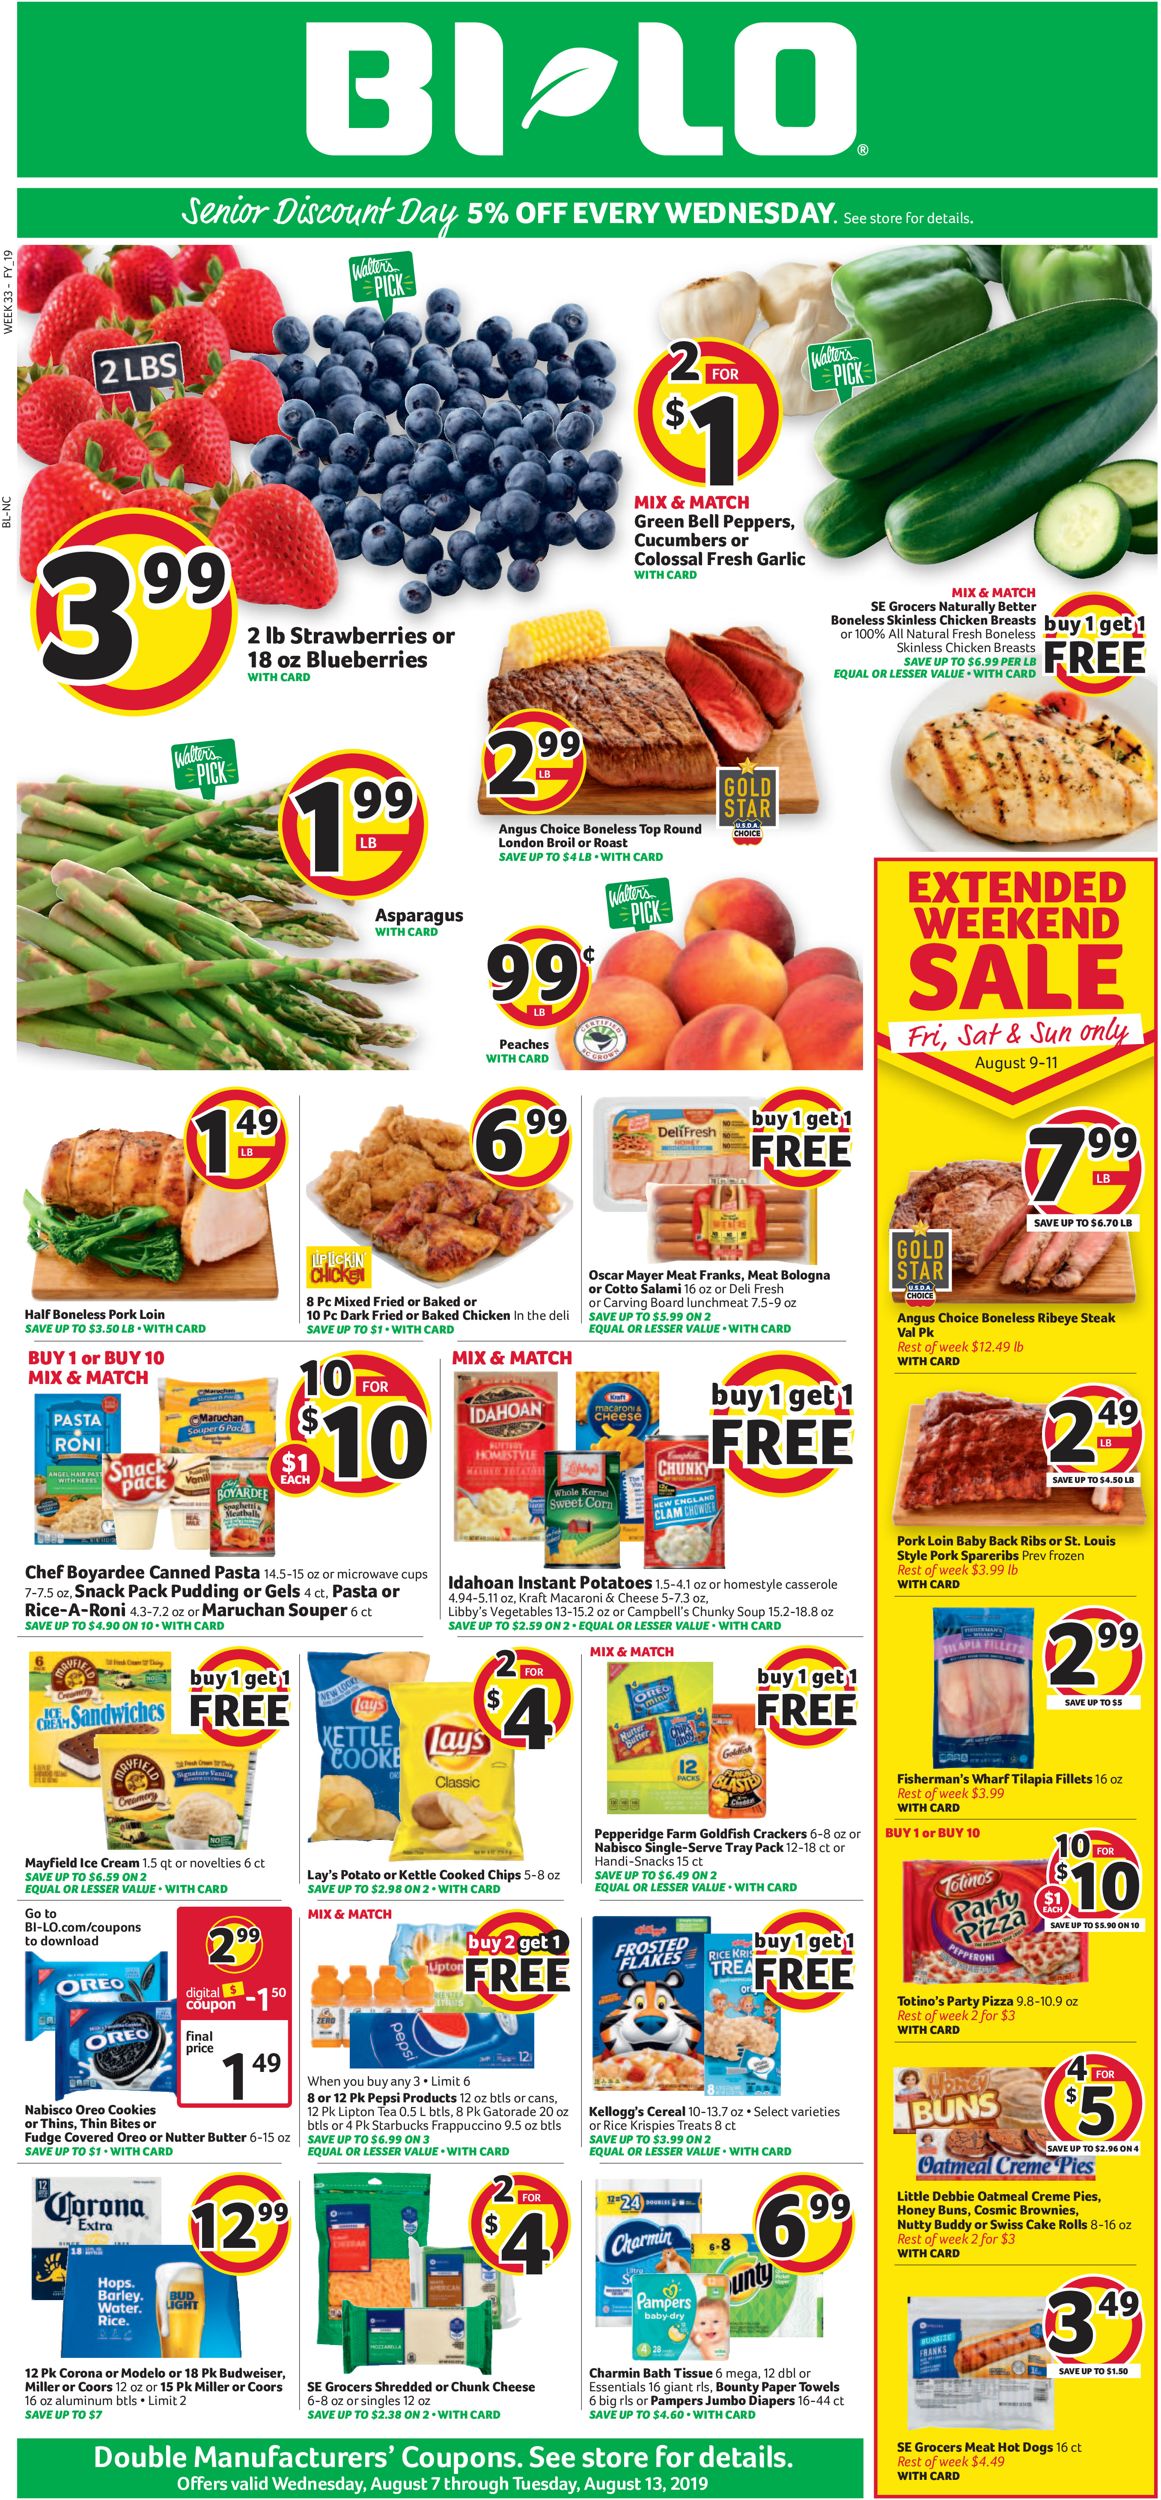 BI-LO Current weekly ad 08/07 - 08/13/2019 - frequent-ads.com